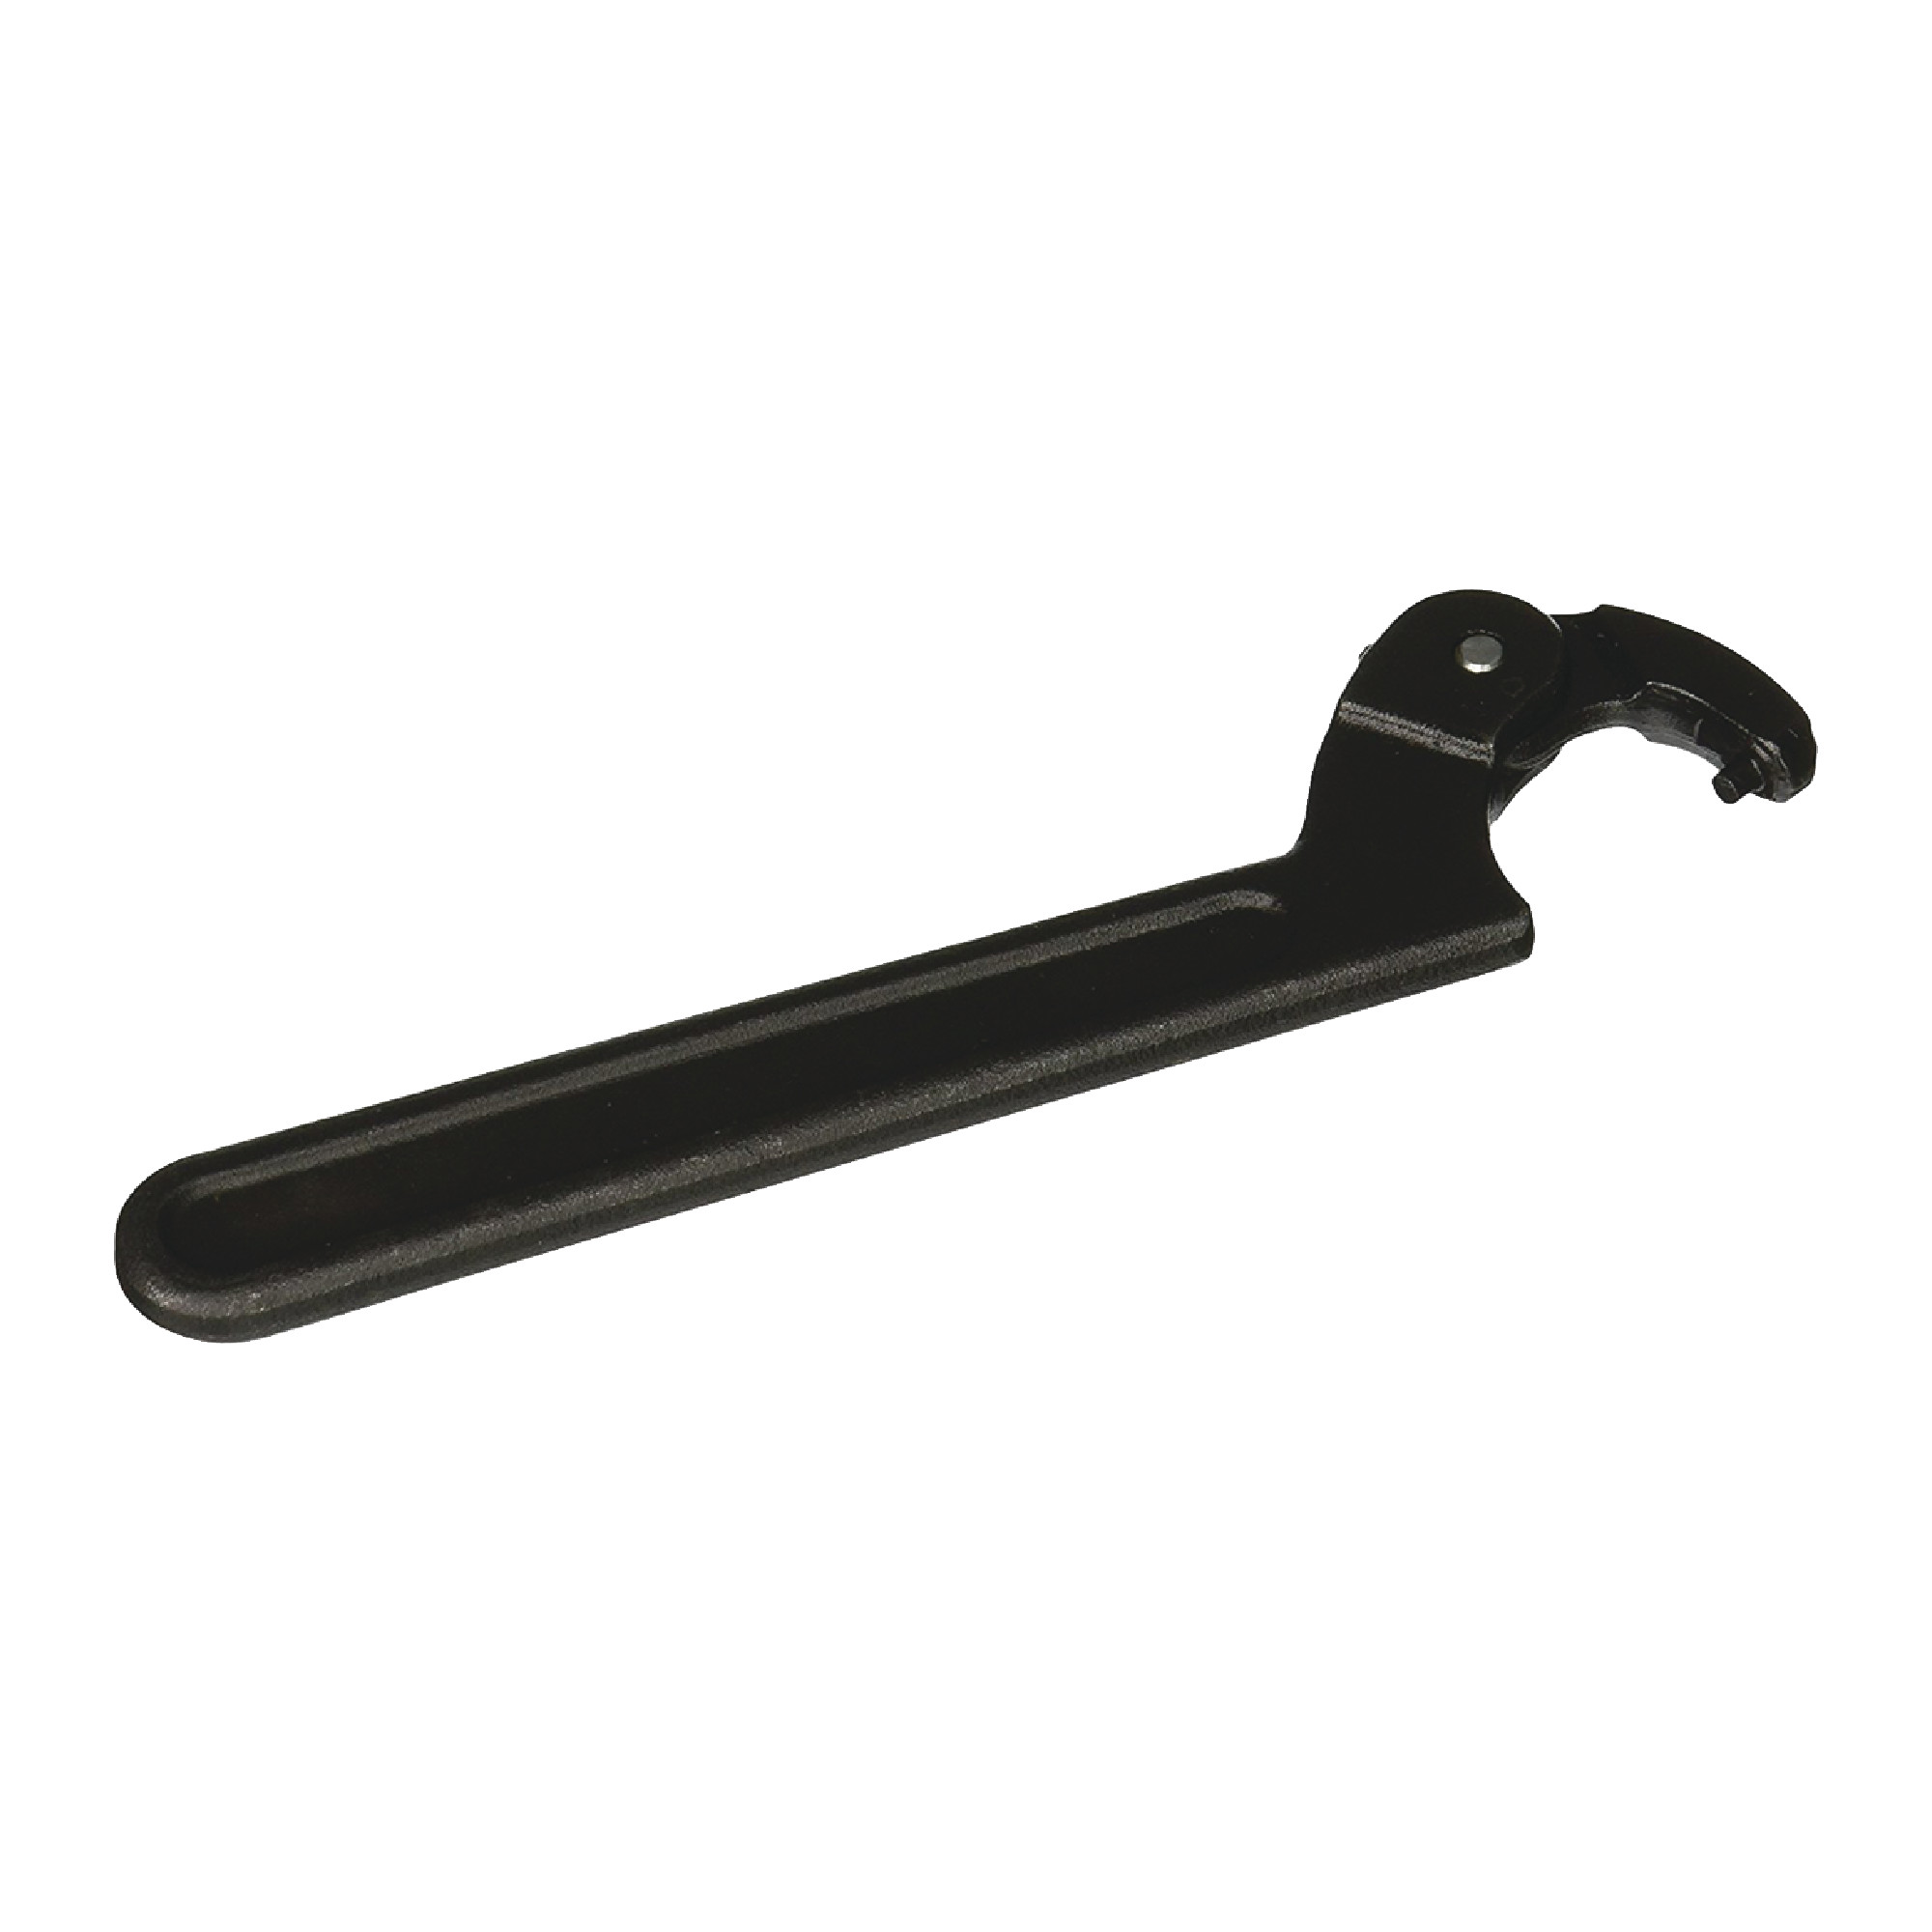 Adjustable Pin Spanner Wrench - Model: O-474  Diameter: 2" - 4-3/4"  Overall Length: 9-1/2"